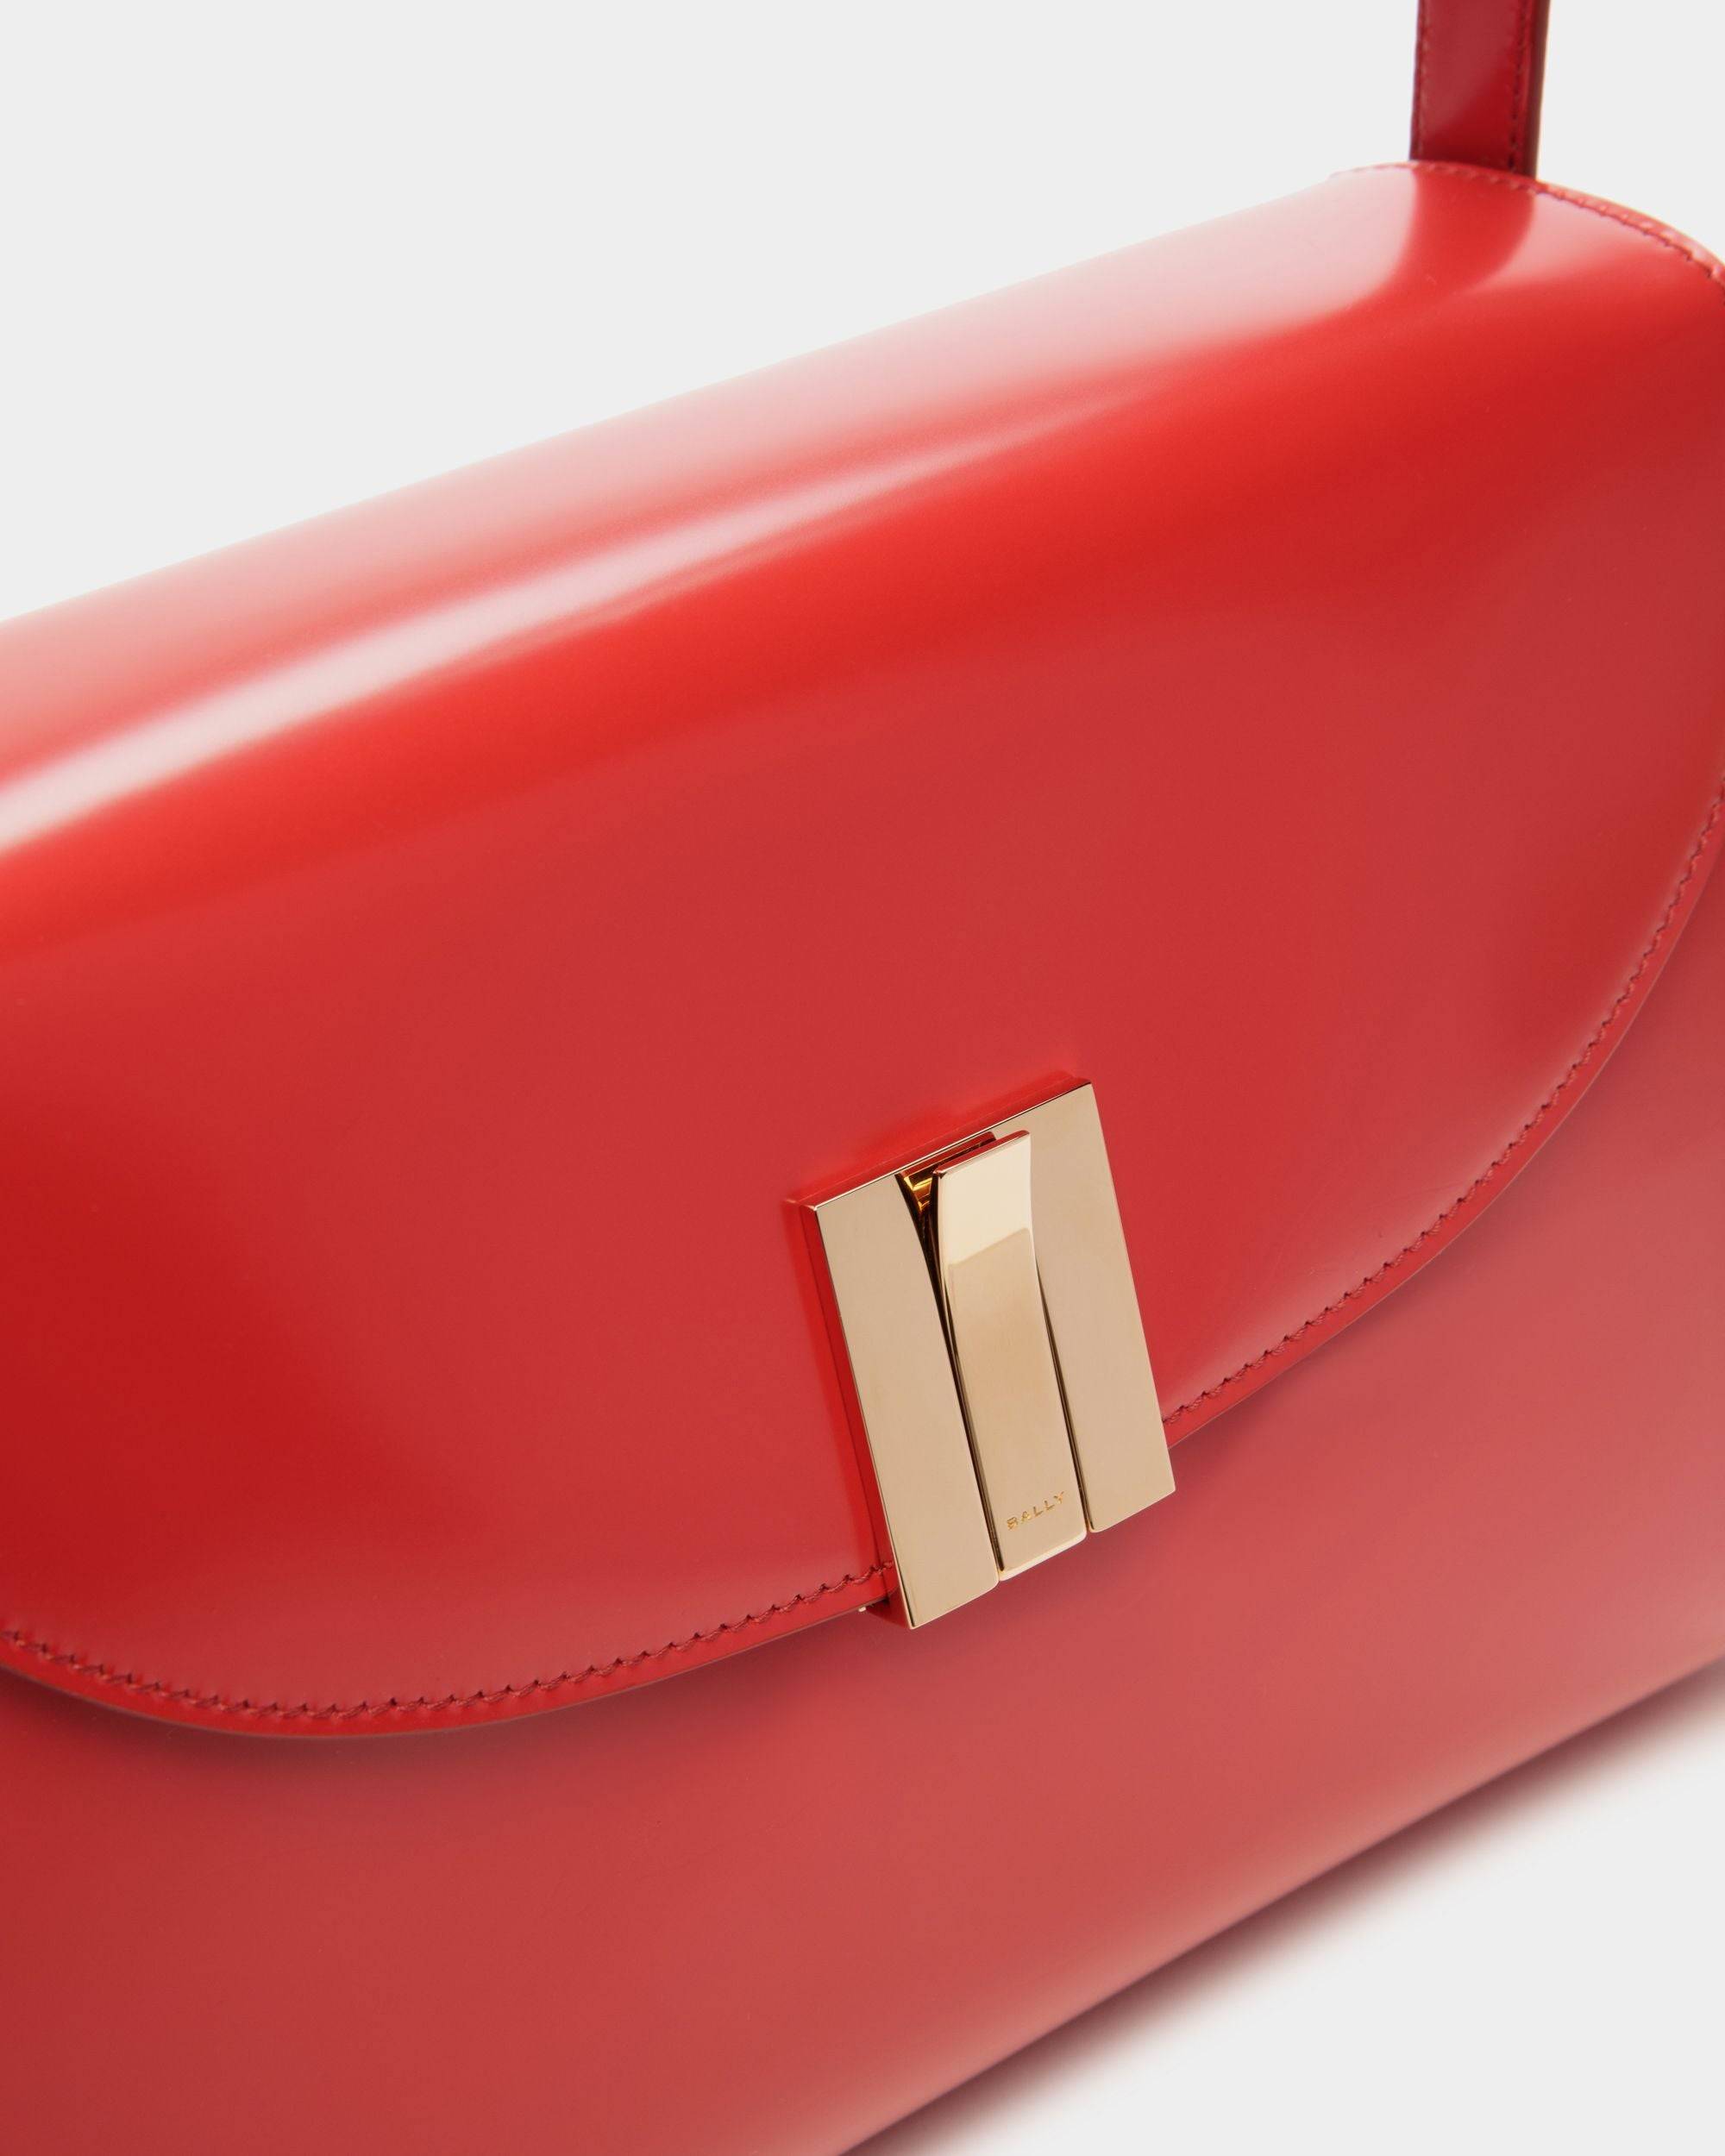 Ollam | Women's Shoulder Bag in Candy Red Brushed Leather | Bally | Still Life Detail